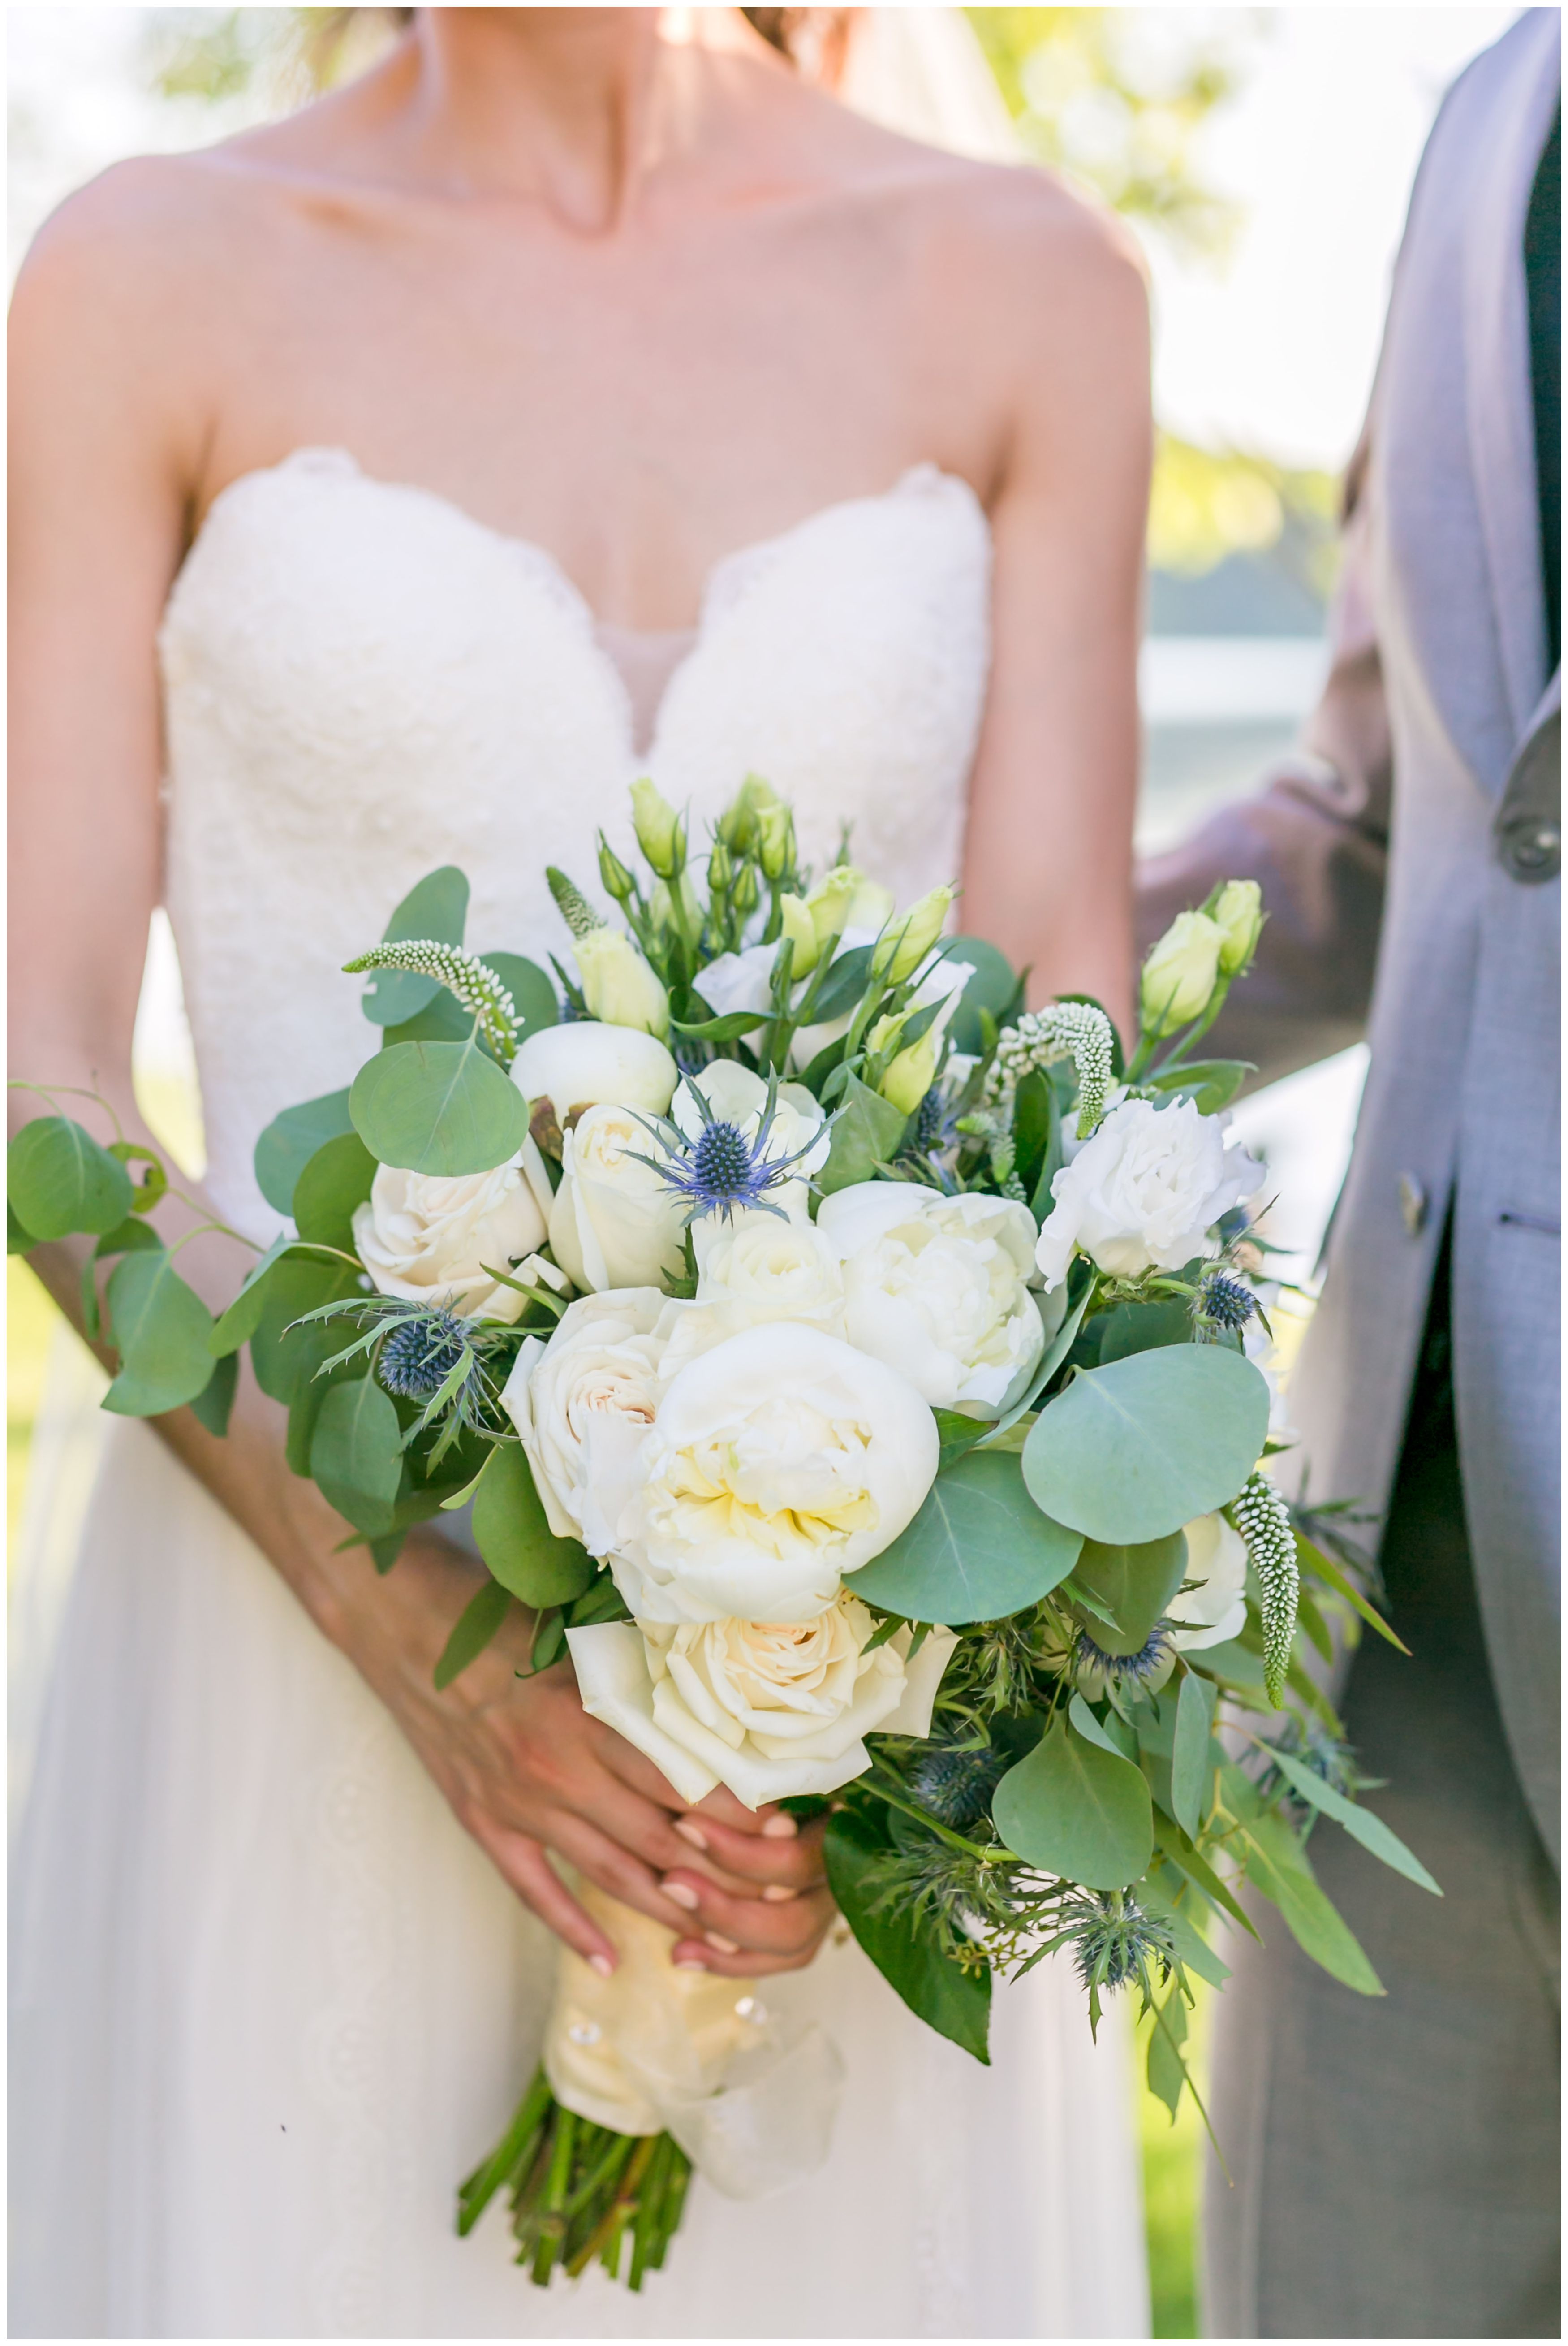 Bridal Bouquet white peonies and white roses with bride and groom